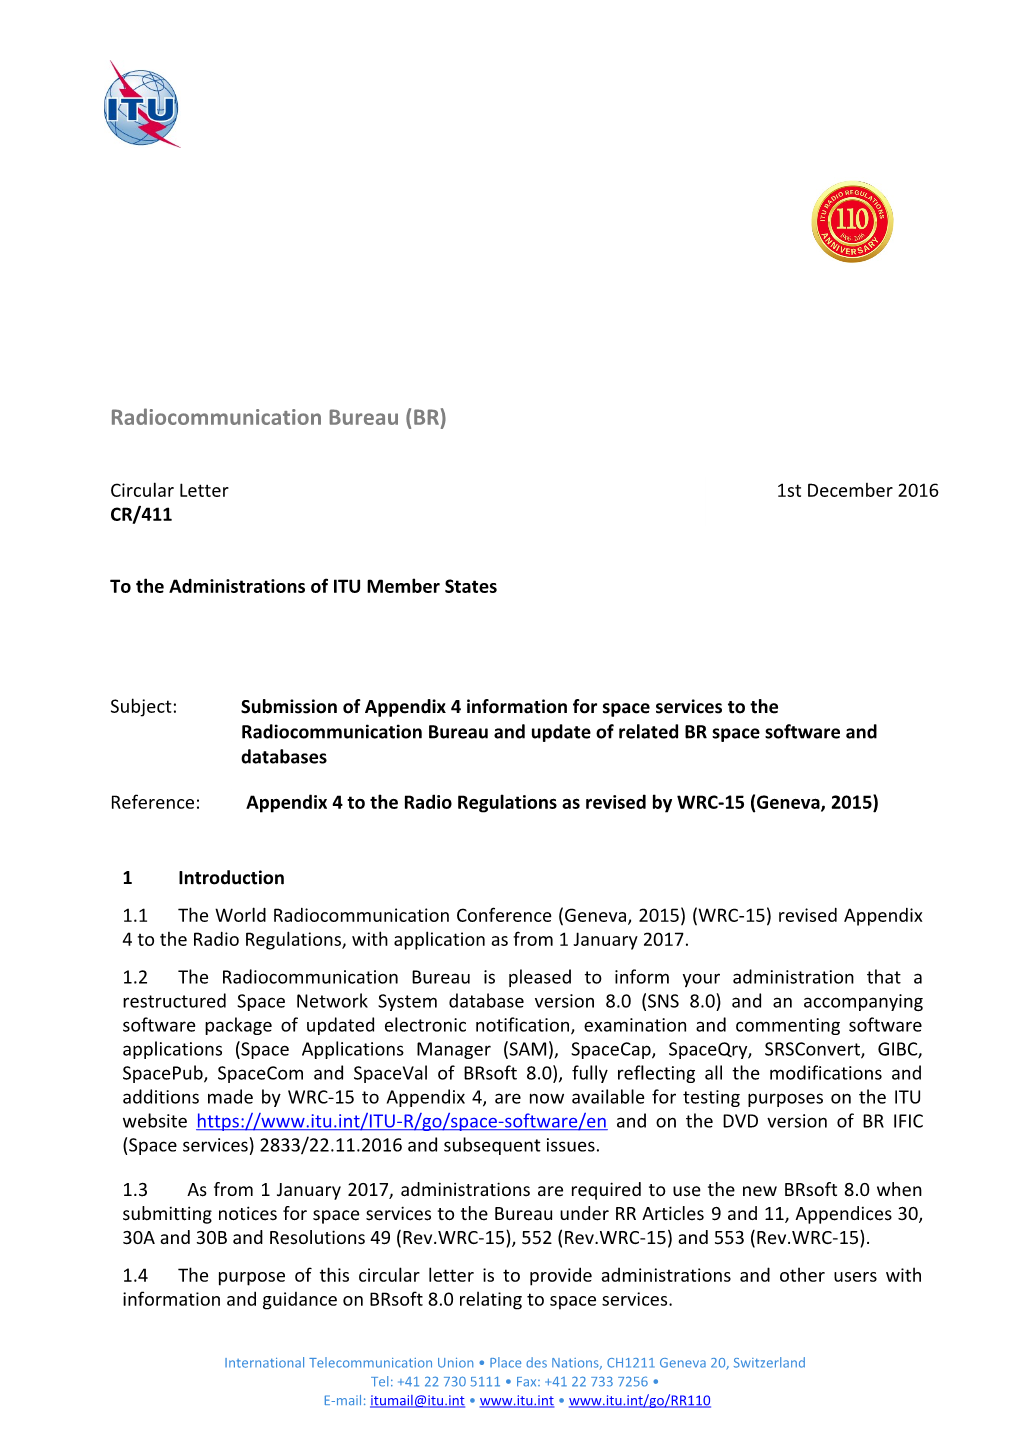 Appendix 4 of the Radio Regulations As Revised by WRC-15